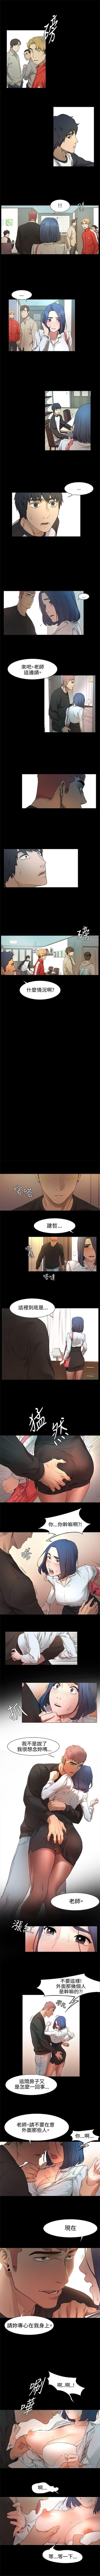 Time 衝突 1-106 官方中文（連載中） Freeteenporn - Page 11